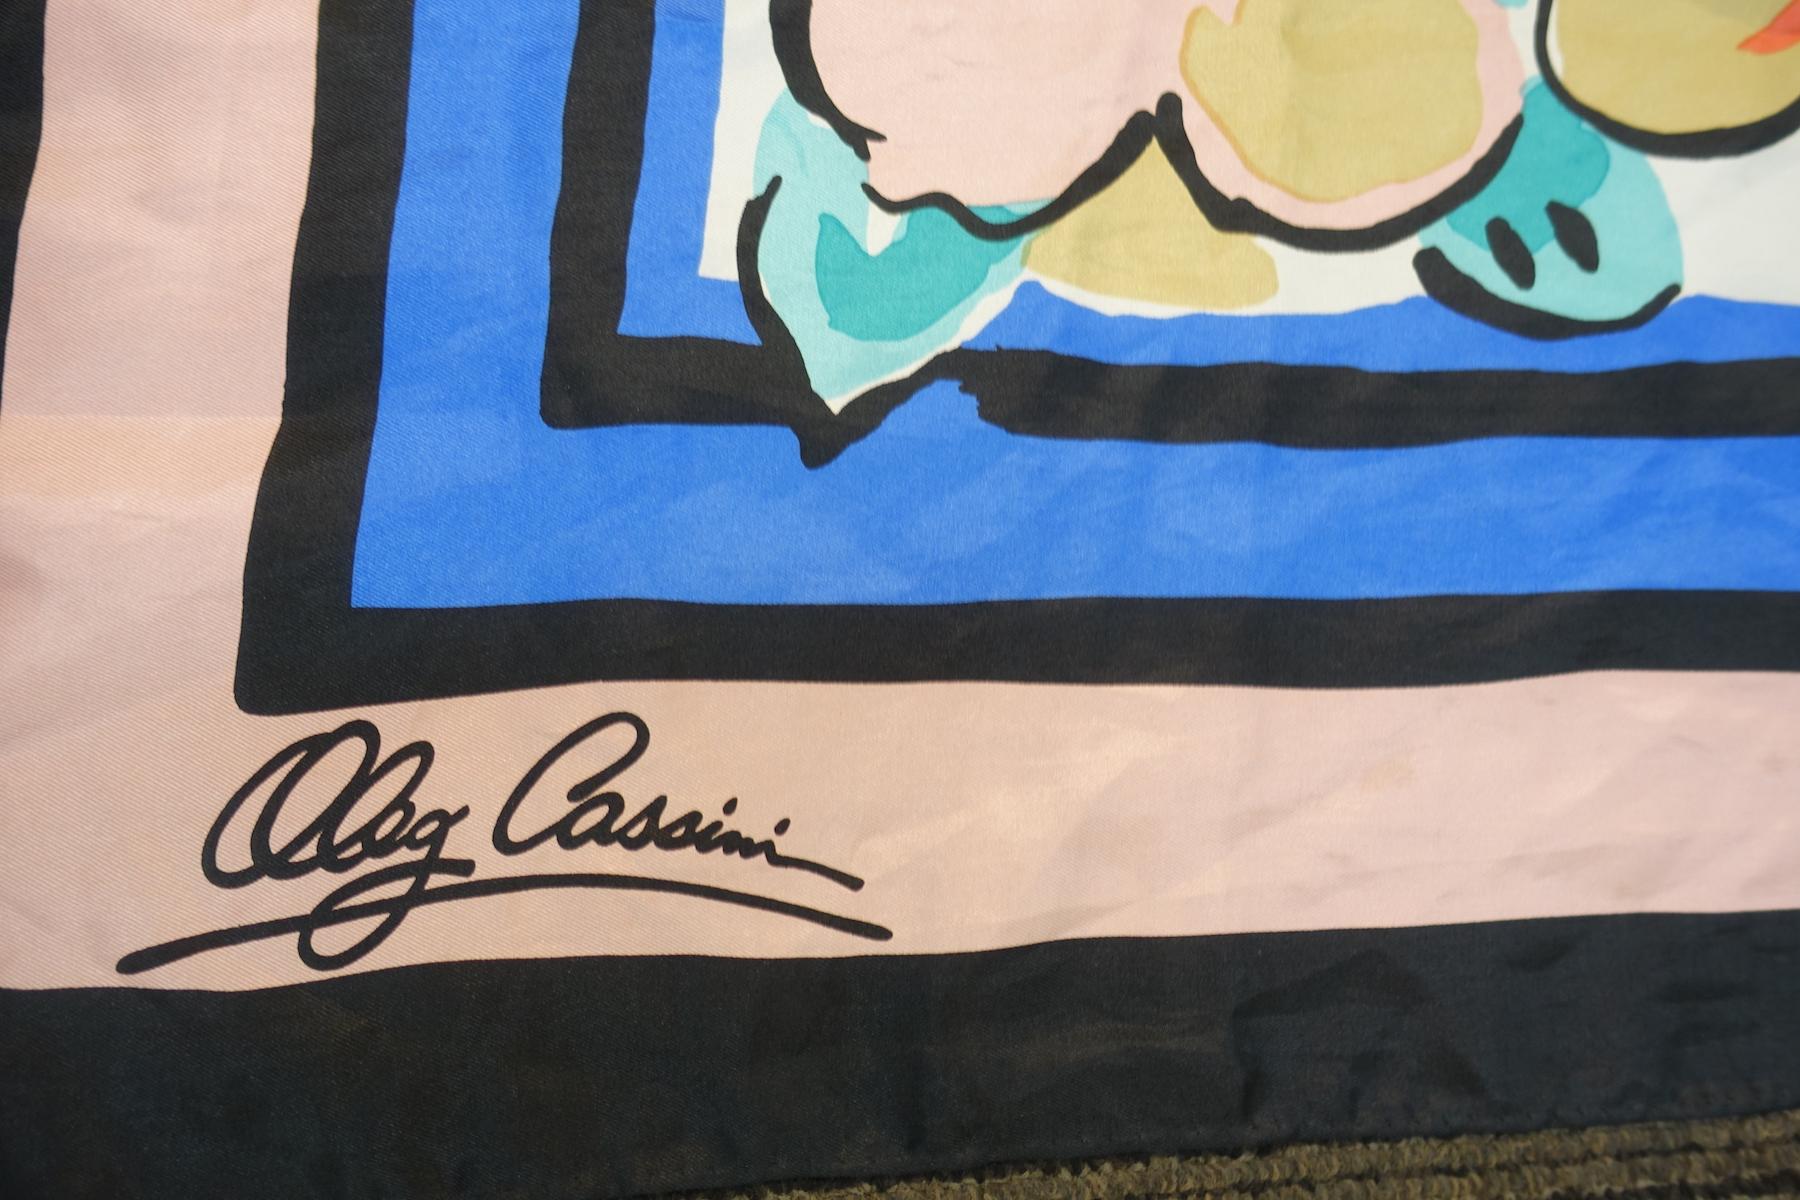 This vintage signed Oleg Cassini scarf features a floral design in hues of pink, coral, turquoise, blue, black and beige.  This scarf measures 35” x 34-1/2” and is signed “Oleg Cassini”.